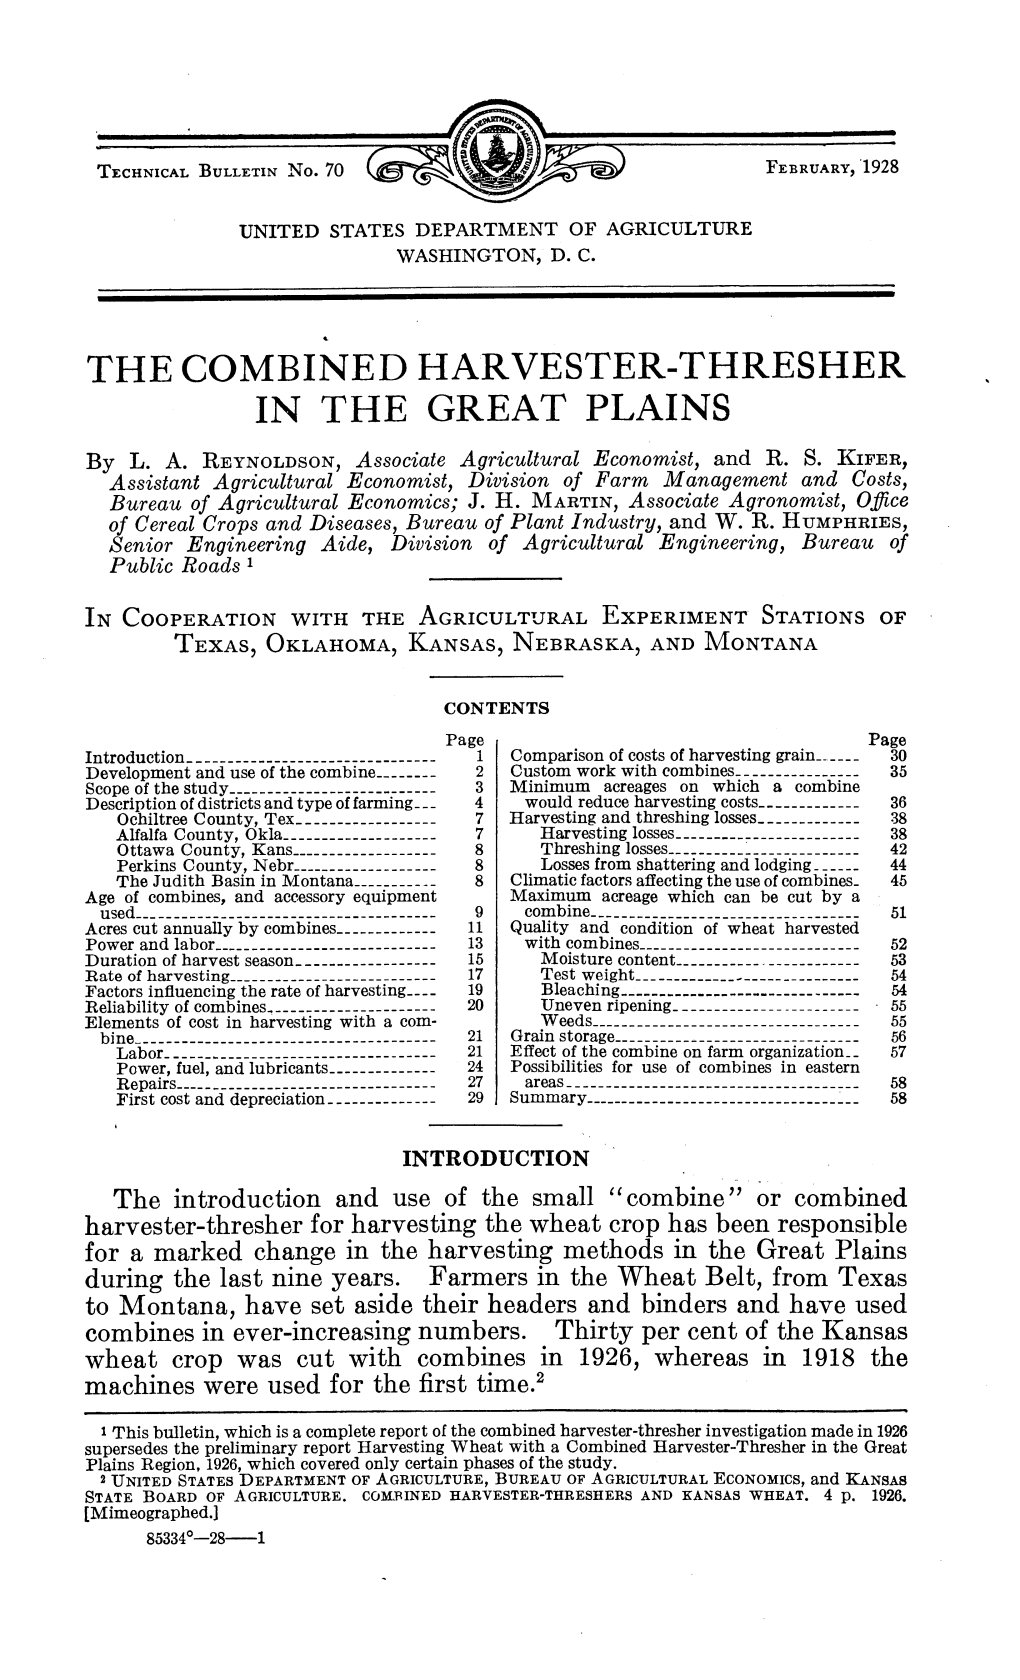 The Combined Harvester-Thresher in the Great Plains